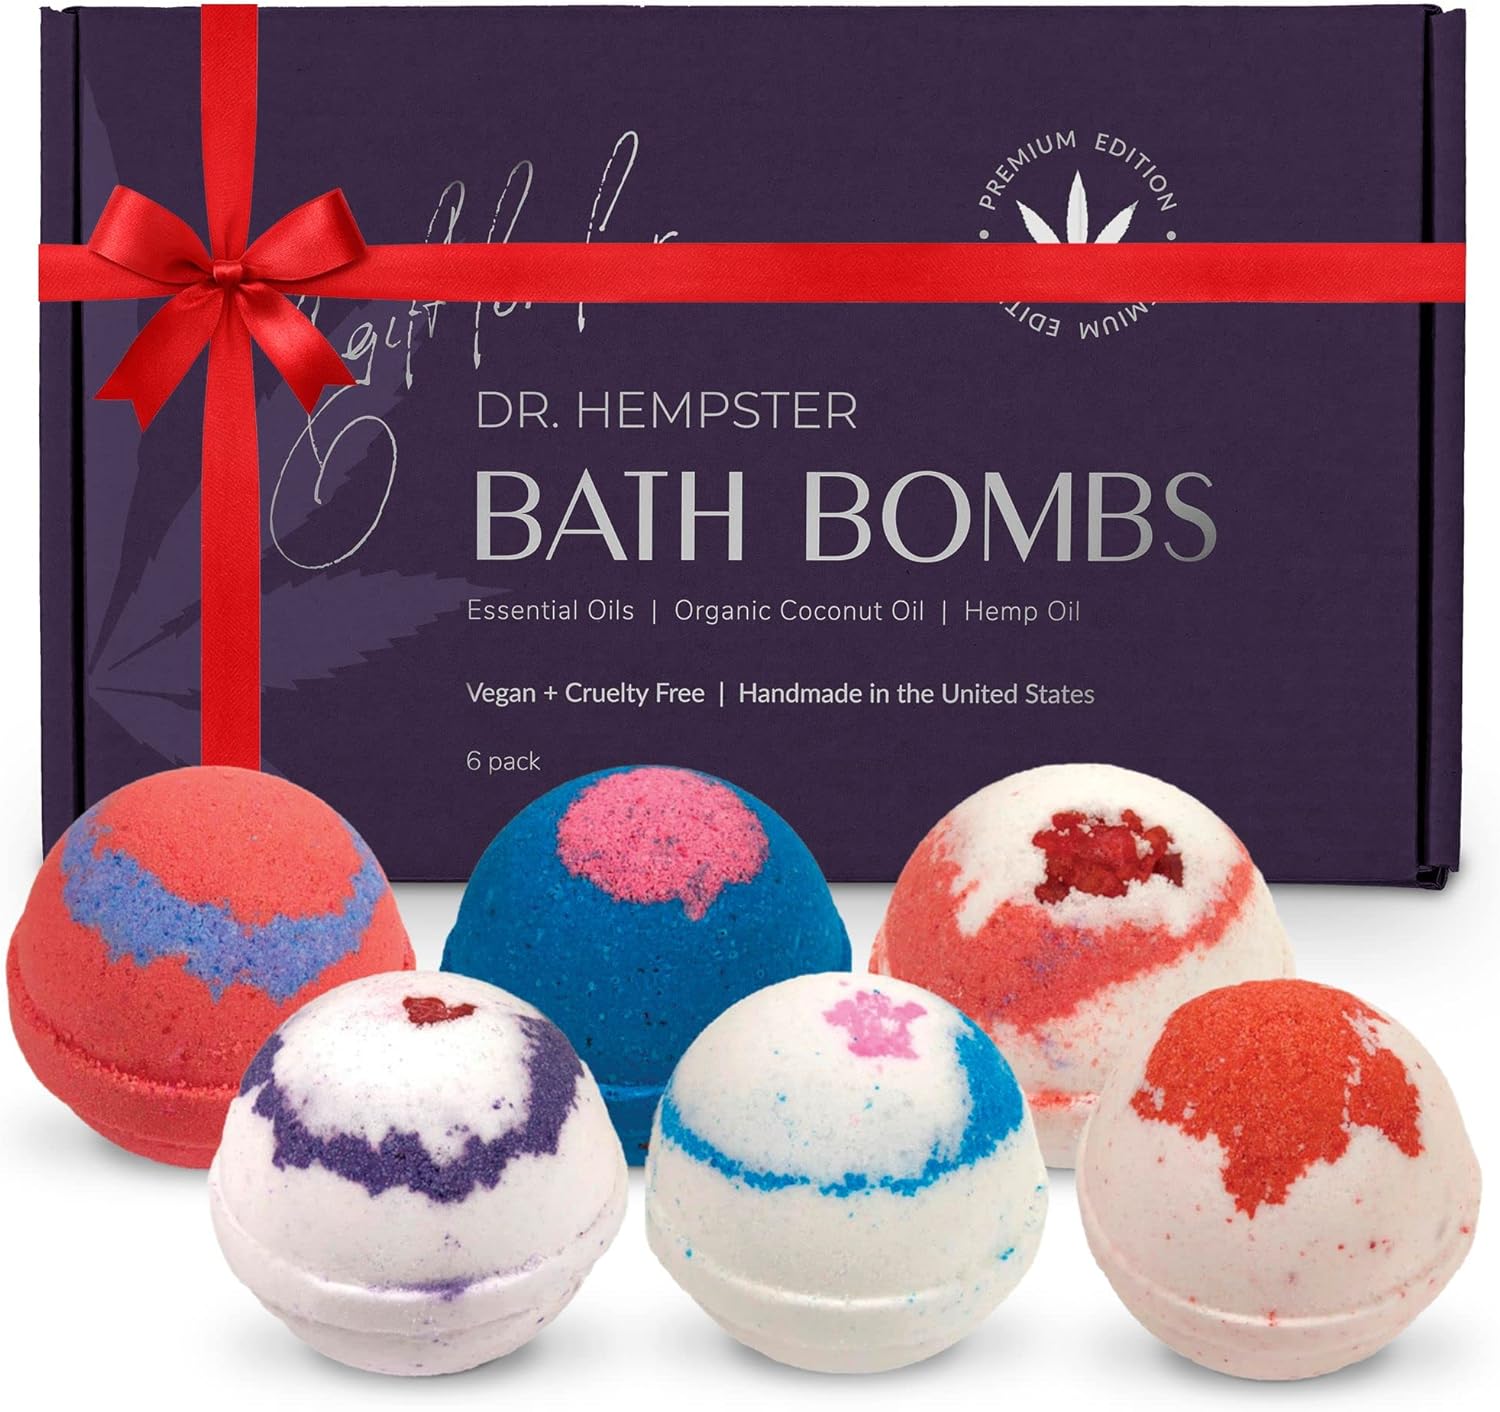 Organic Bath Bomb Gift Set - 6 Pack - Gifts for Women - Natural Coconut and Hemp Bath Bombs with Essential Oils – Mother's Day Gifts for Mom or Wife - Made in The USA